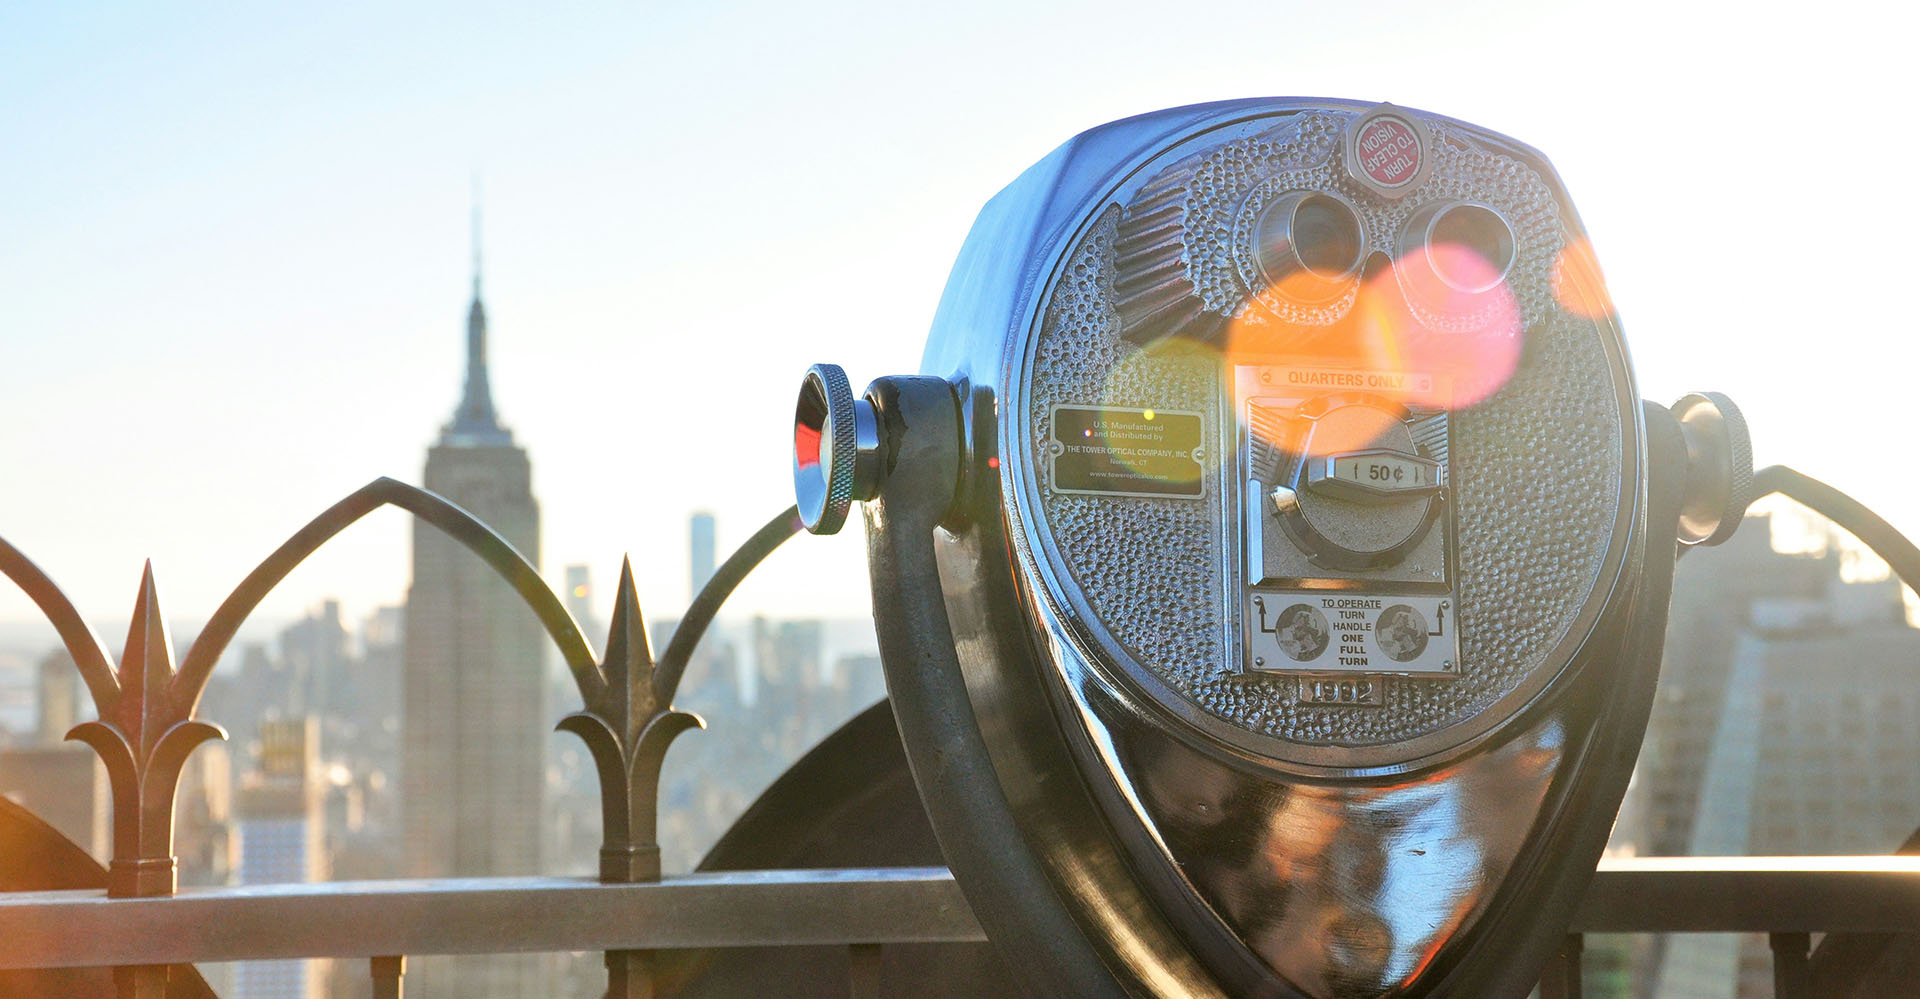 viewing scope directed at Empire State Building, Sheaff Brock investment advisors blog, retail consumers